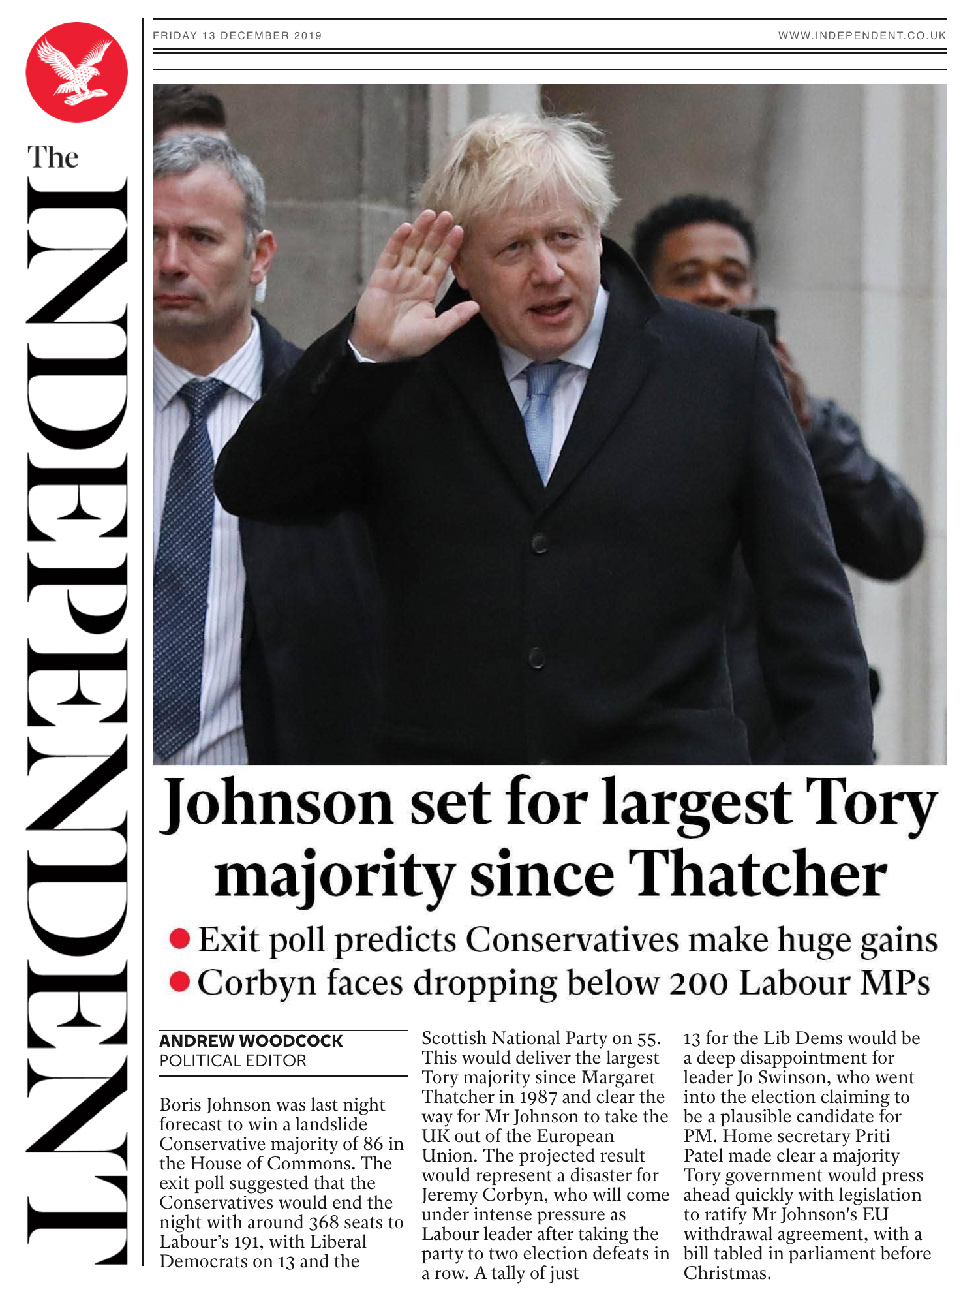 The Independent front page